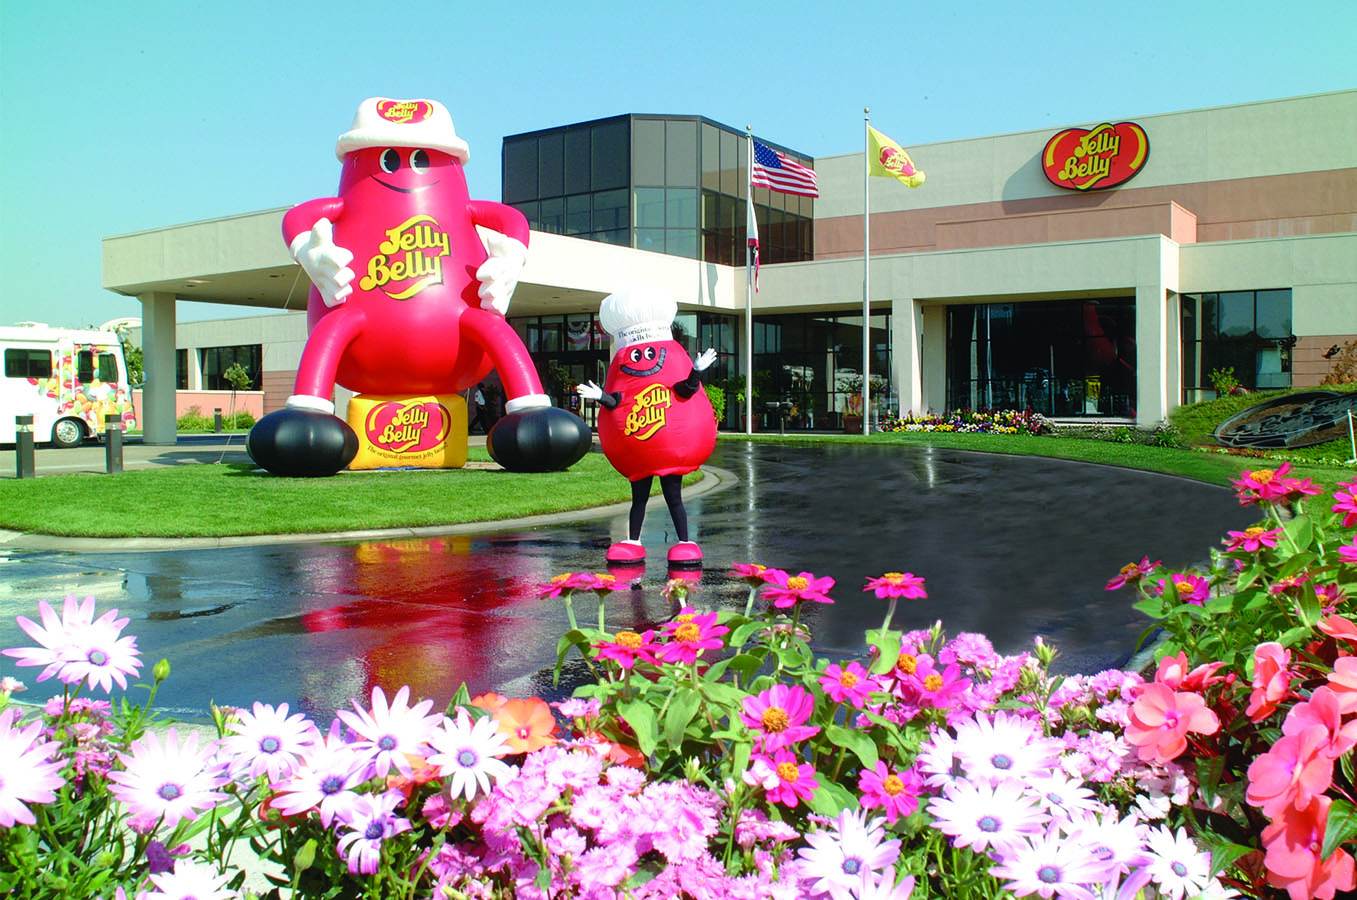 Image of Jelly Belly Factory in Fairfield, CA courtesy of VisitVacaville